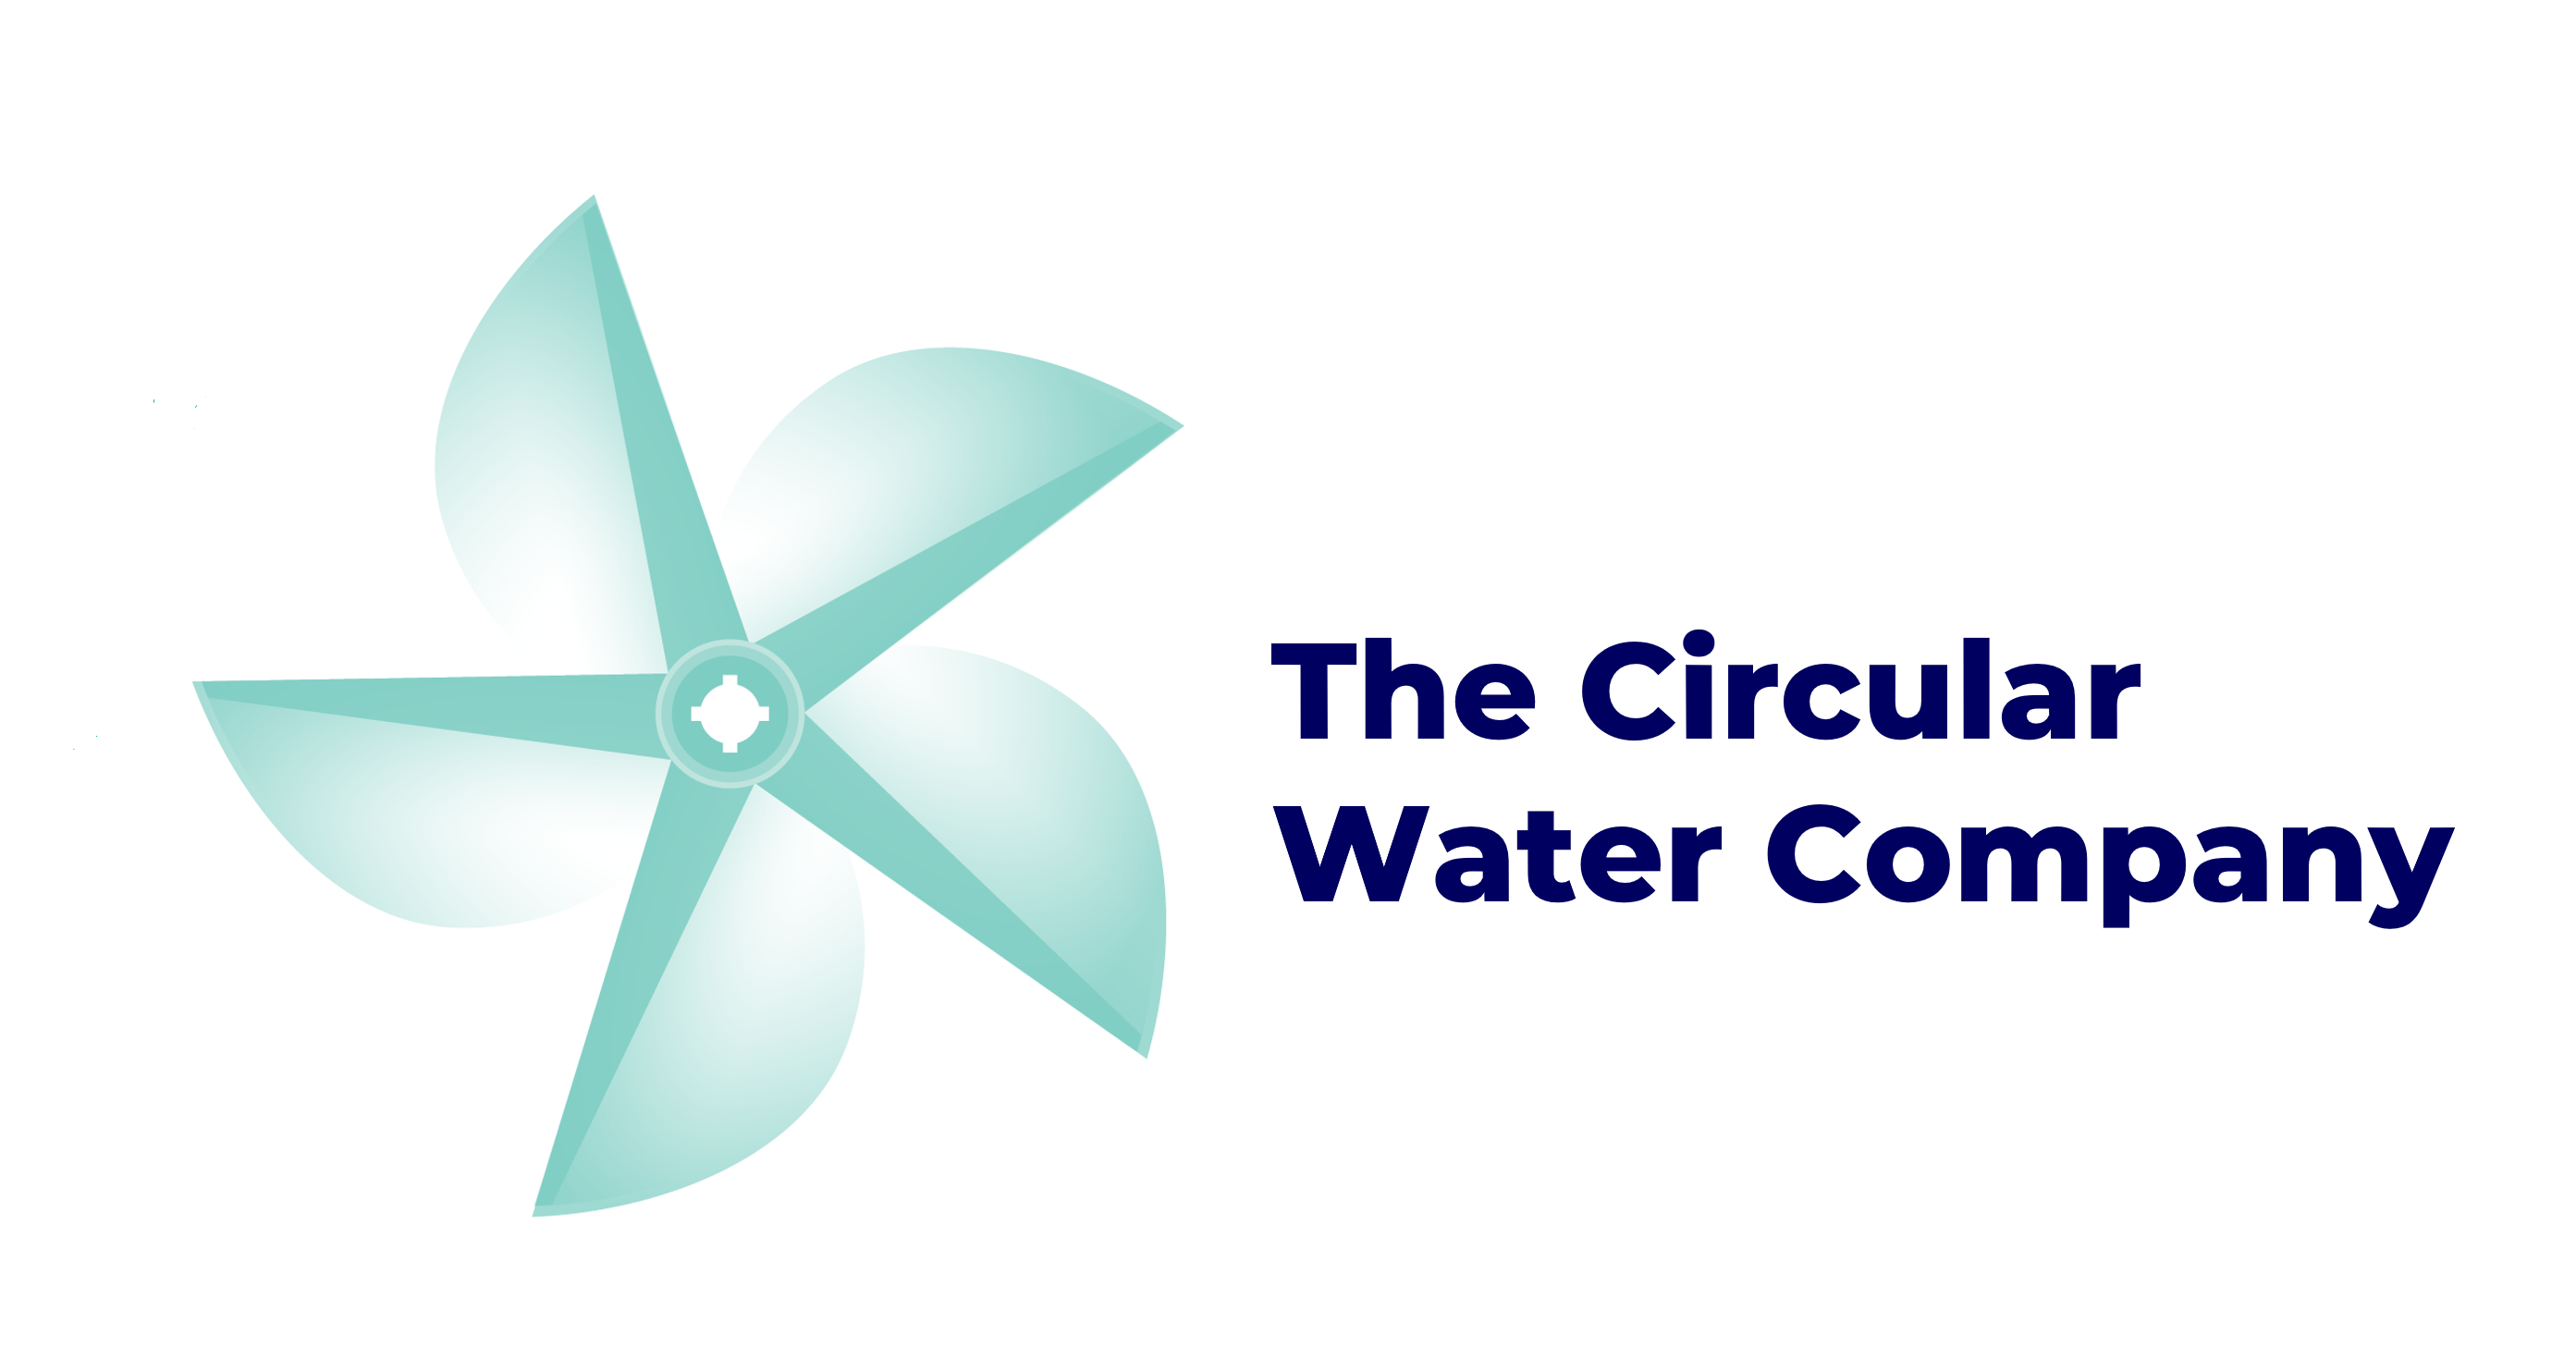 The Circular Water Company |Solving two global challenges water and waste plastic pollution